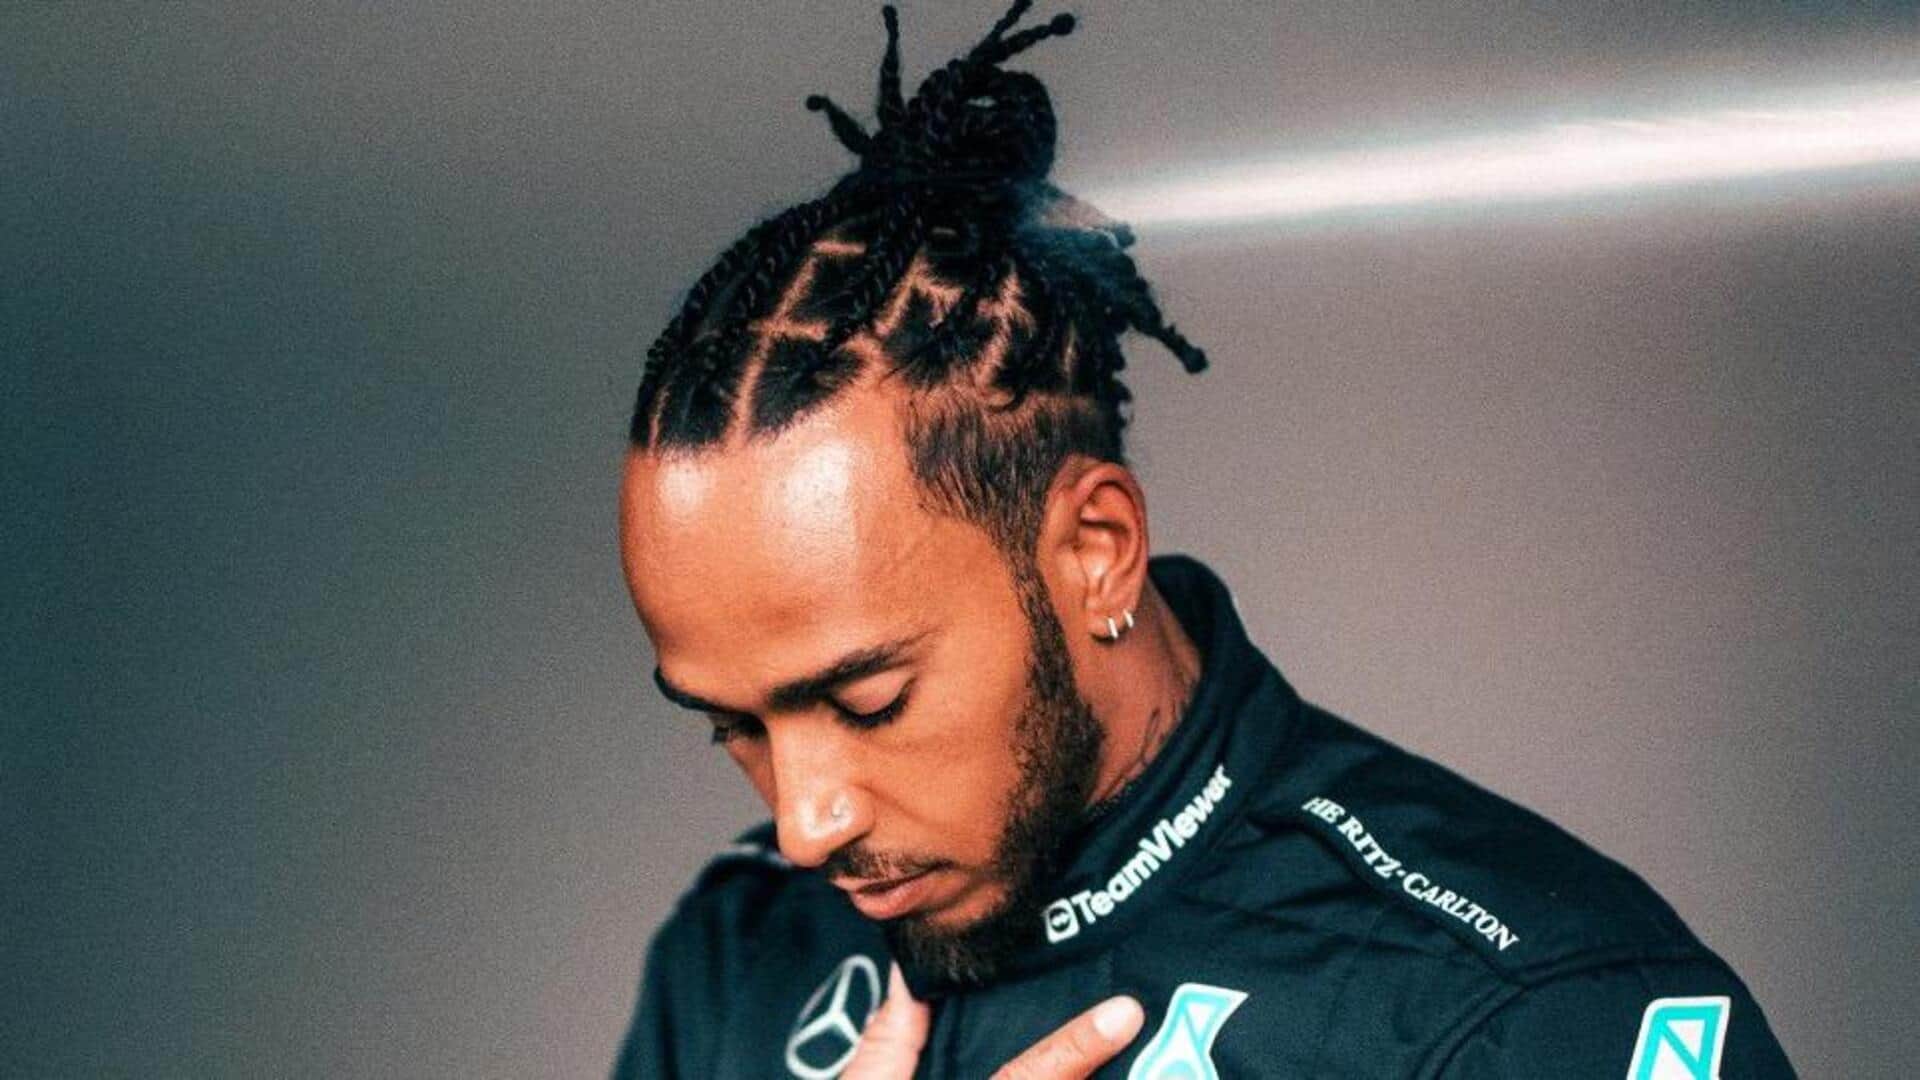 Lewis Hamilton to join Ferrari in 2025; F1 giants confirm